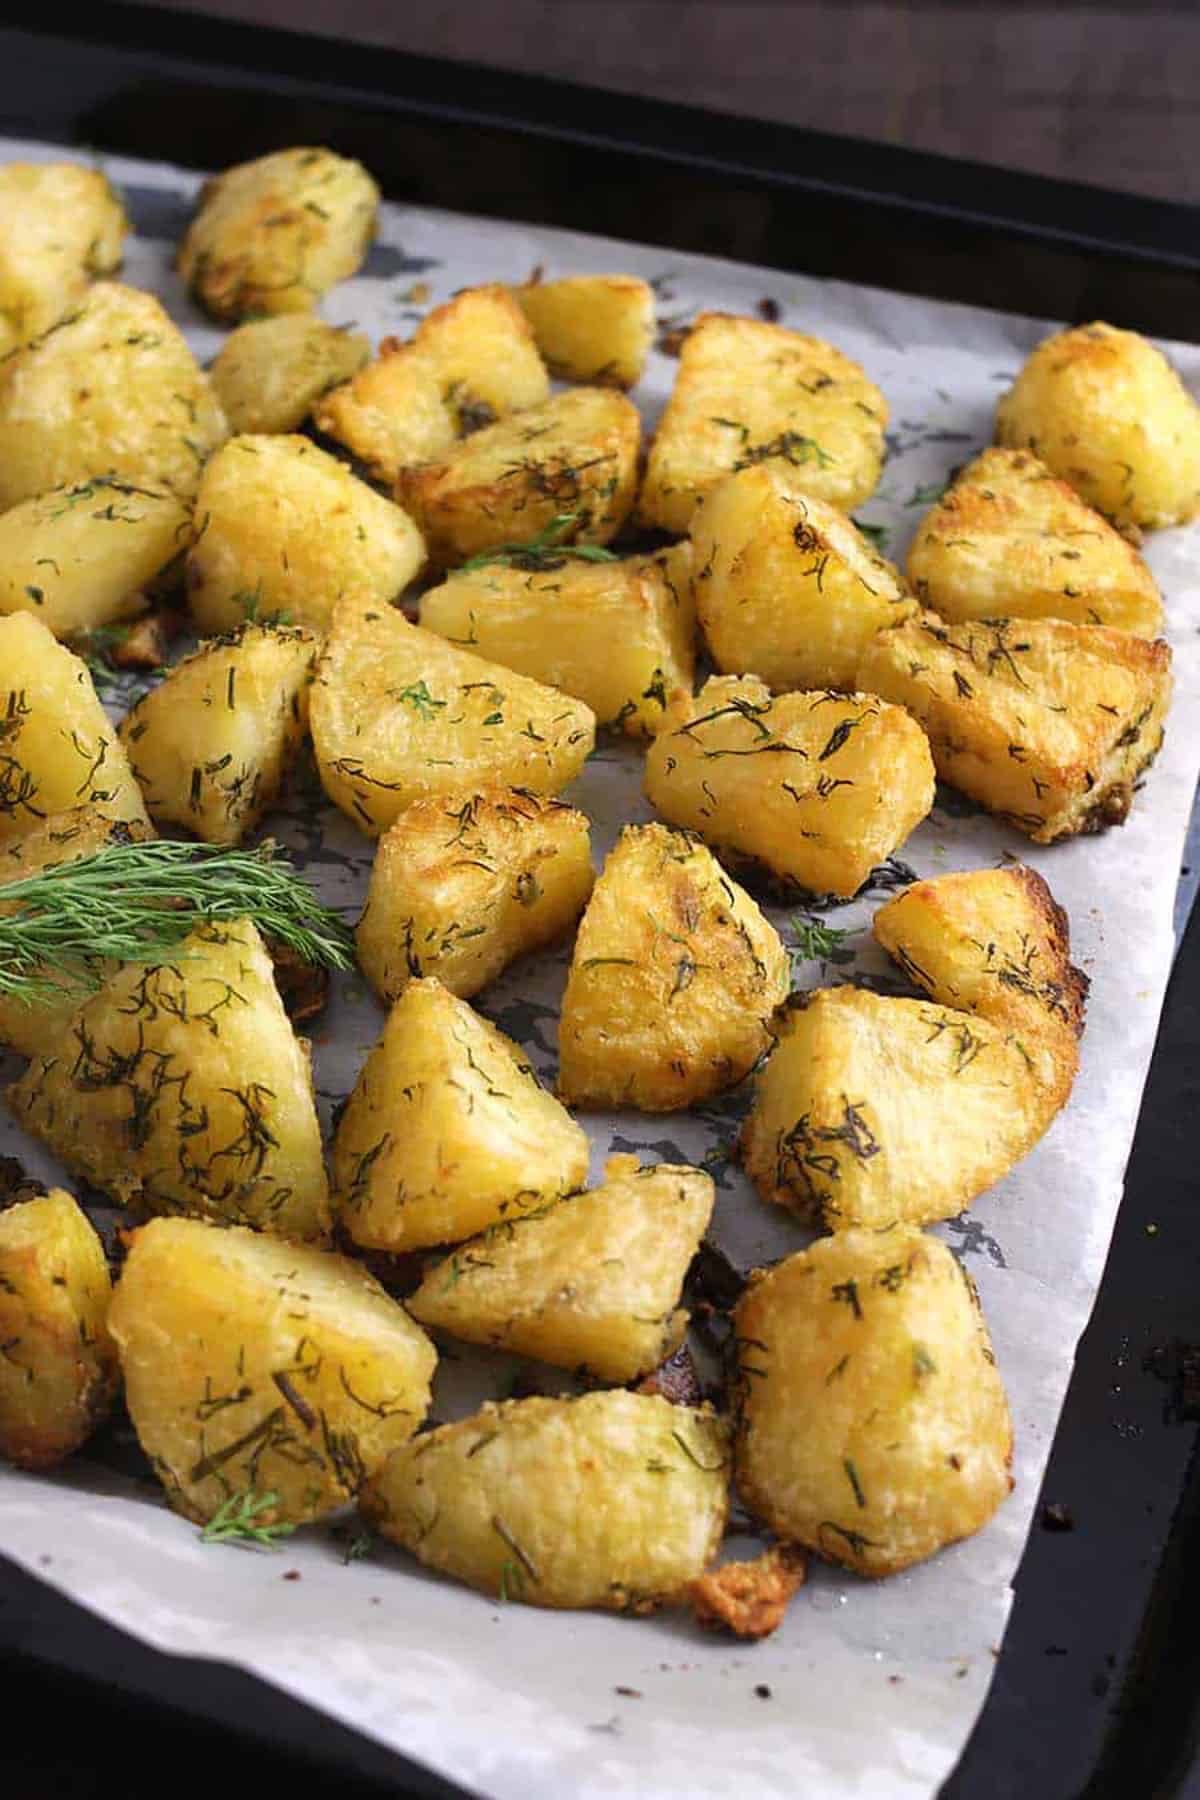 Zoom-out shot of Roasted garlic-herb potatoes garnished with fresh dill leaves in a baking pan.